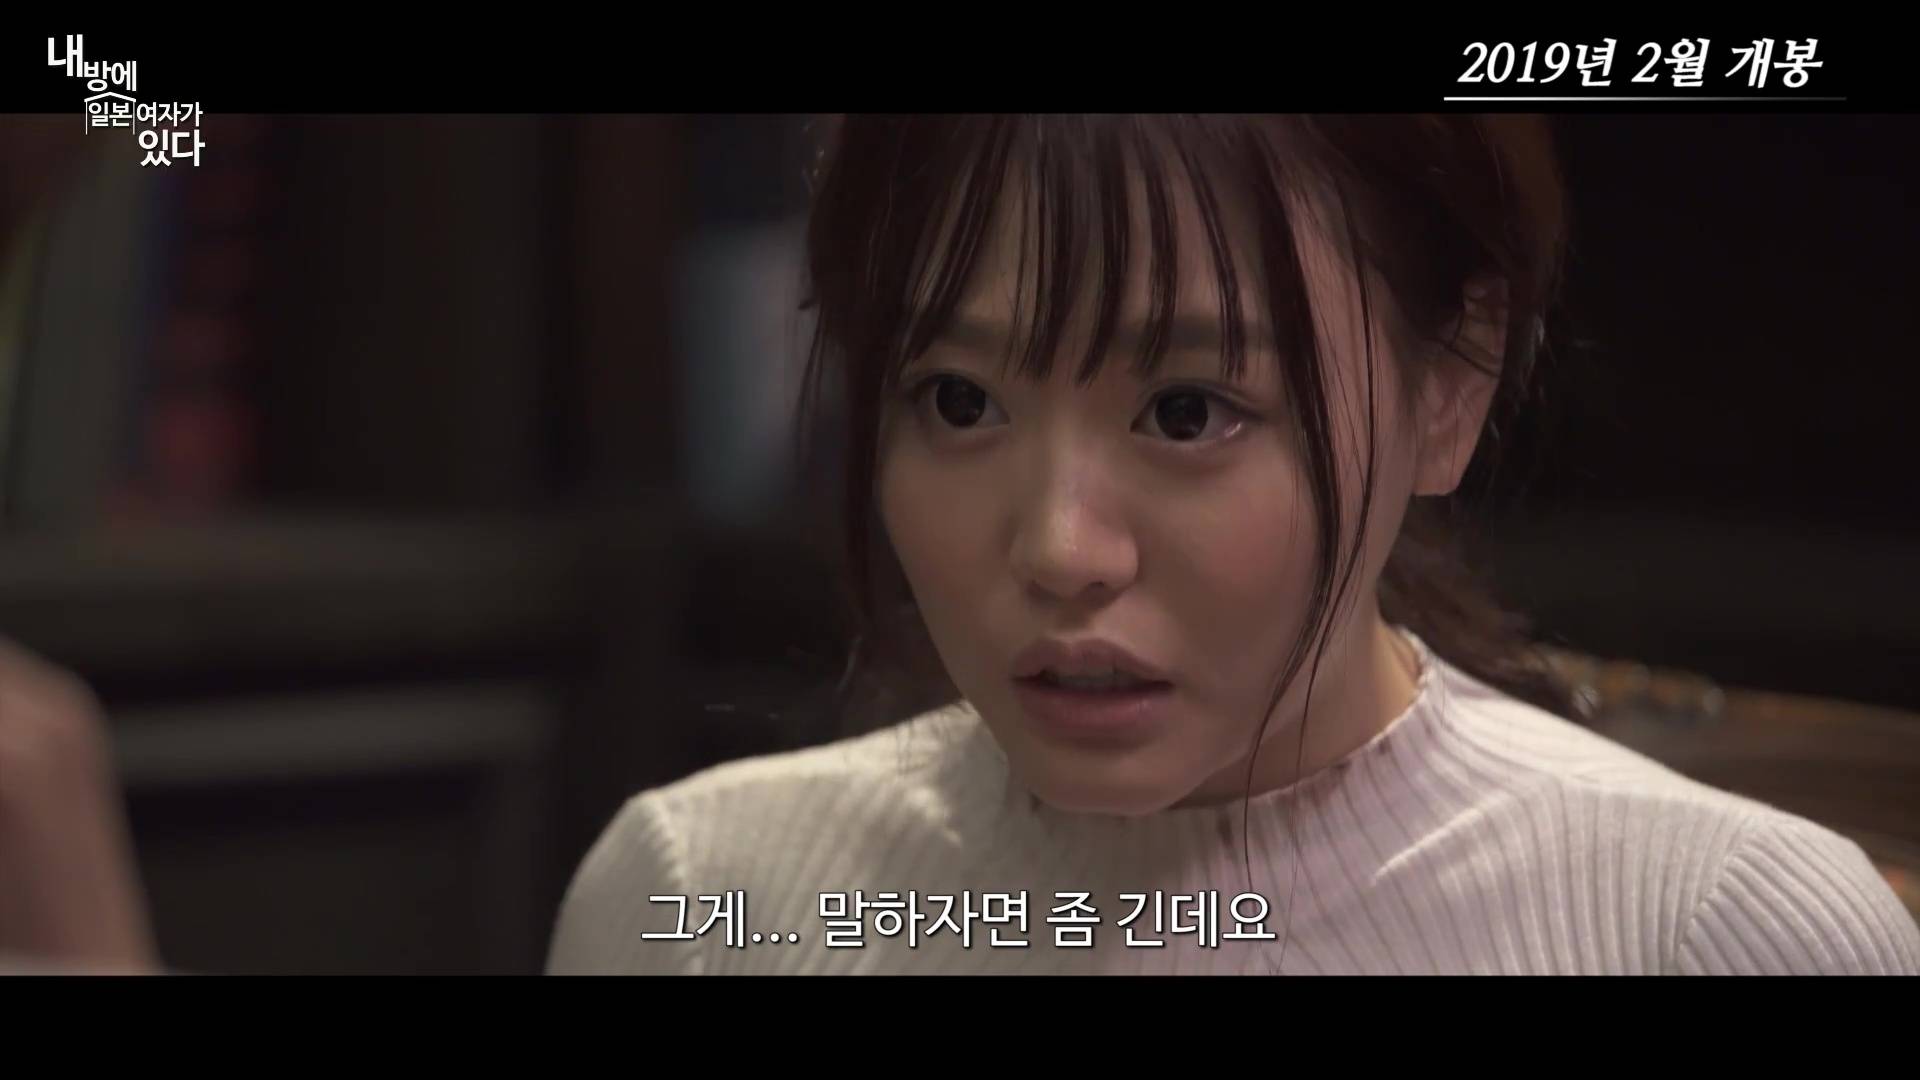 Video Trailer Released For The Upcoming Korean Movie There Is A